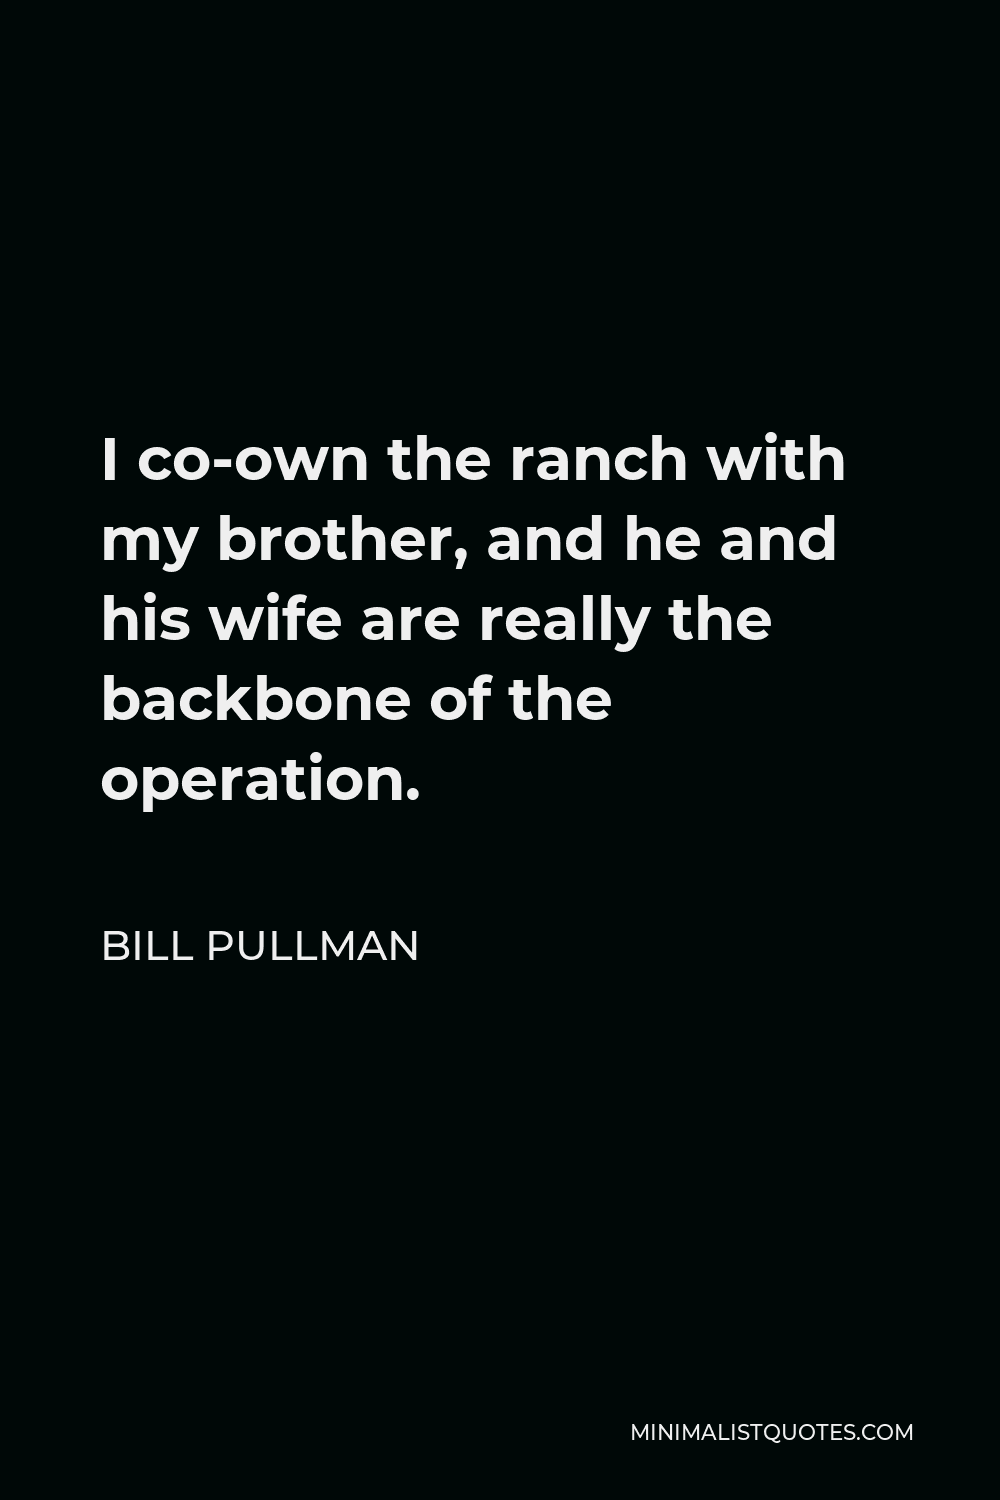 Bill Pullman Quote - I co-own the ranch with my brother, and he and his wife are really the backbone of the operation.